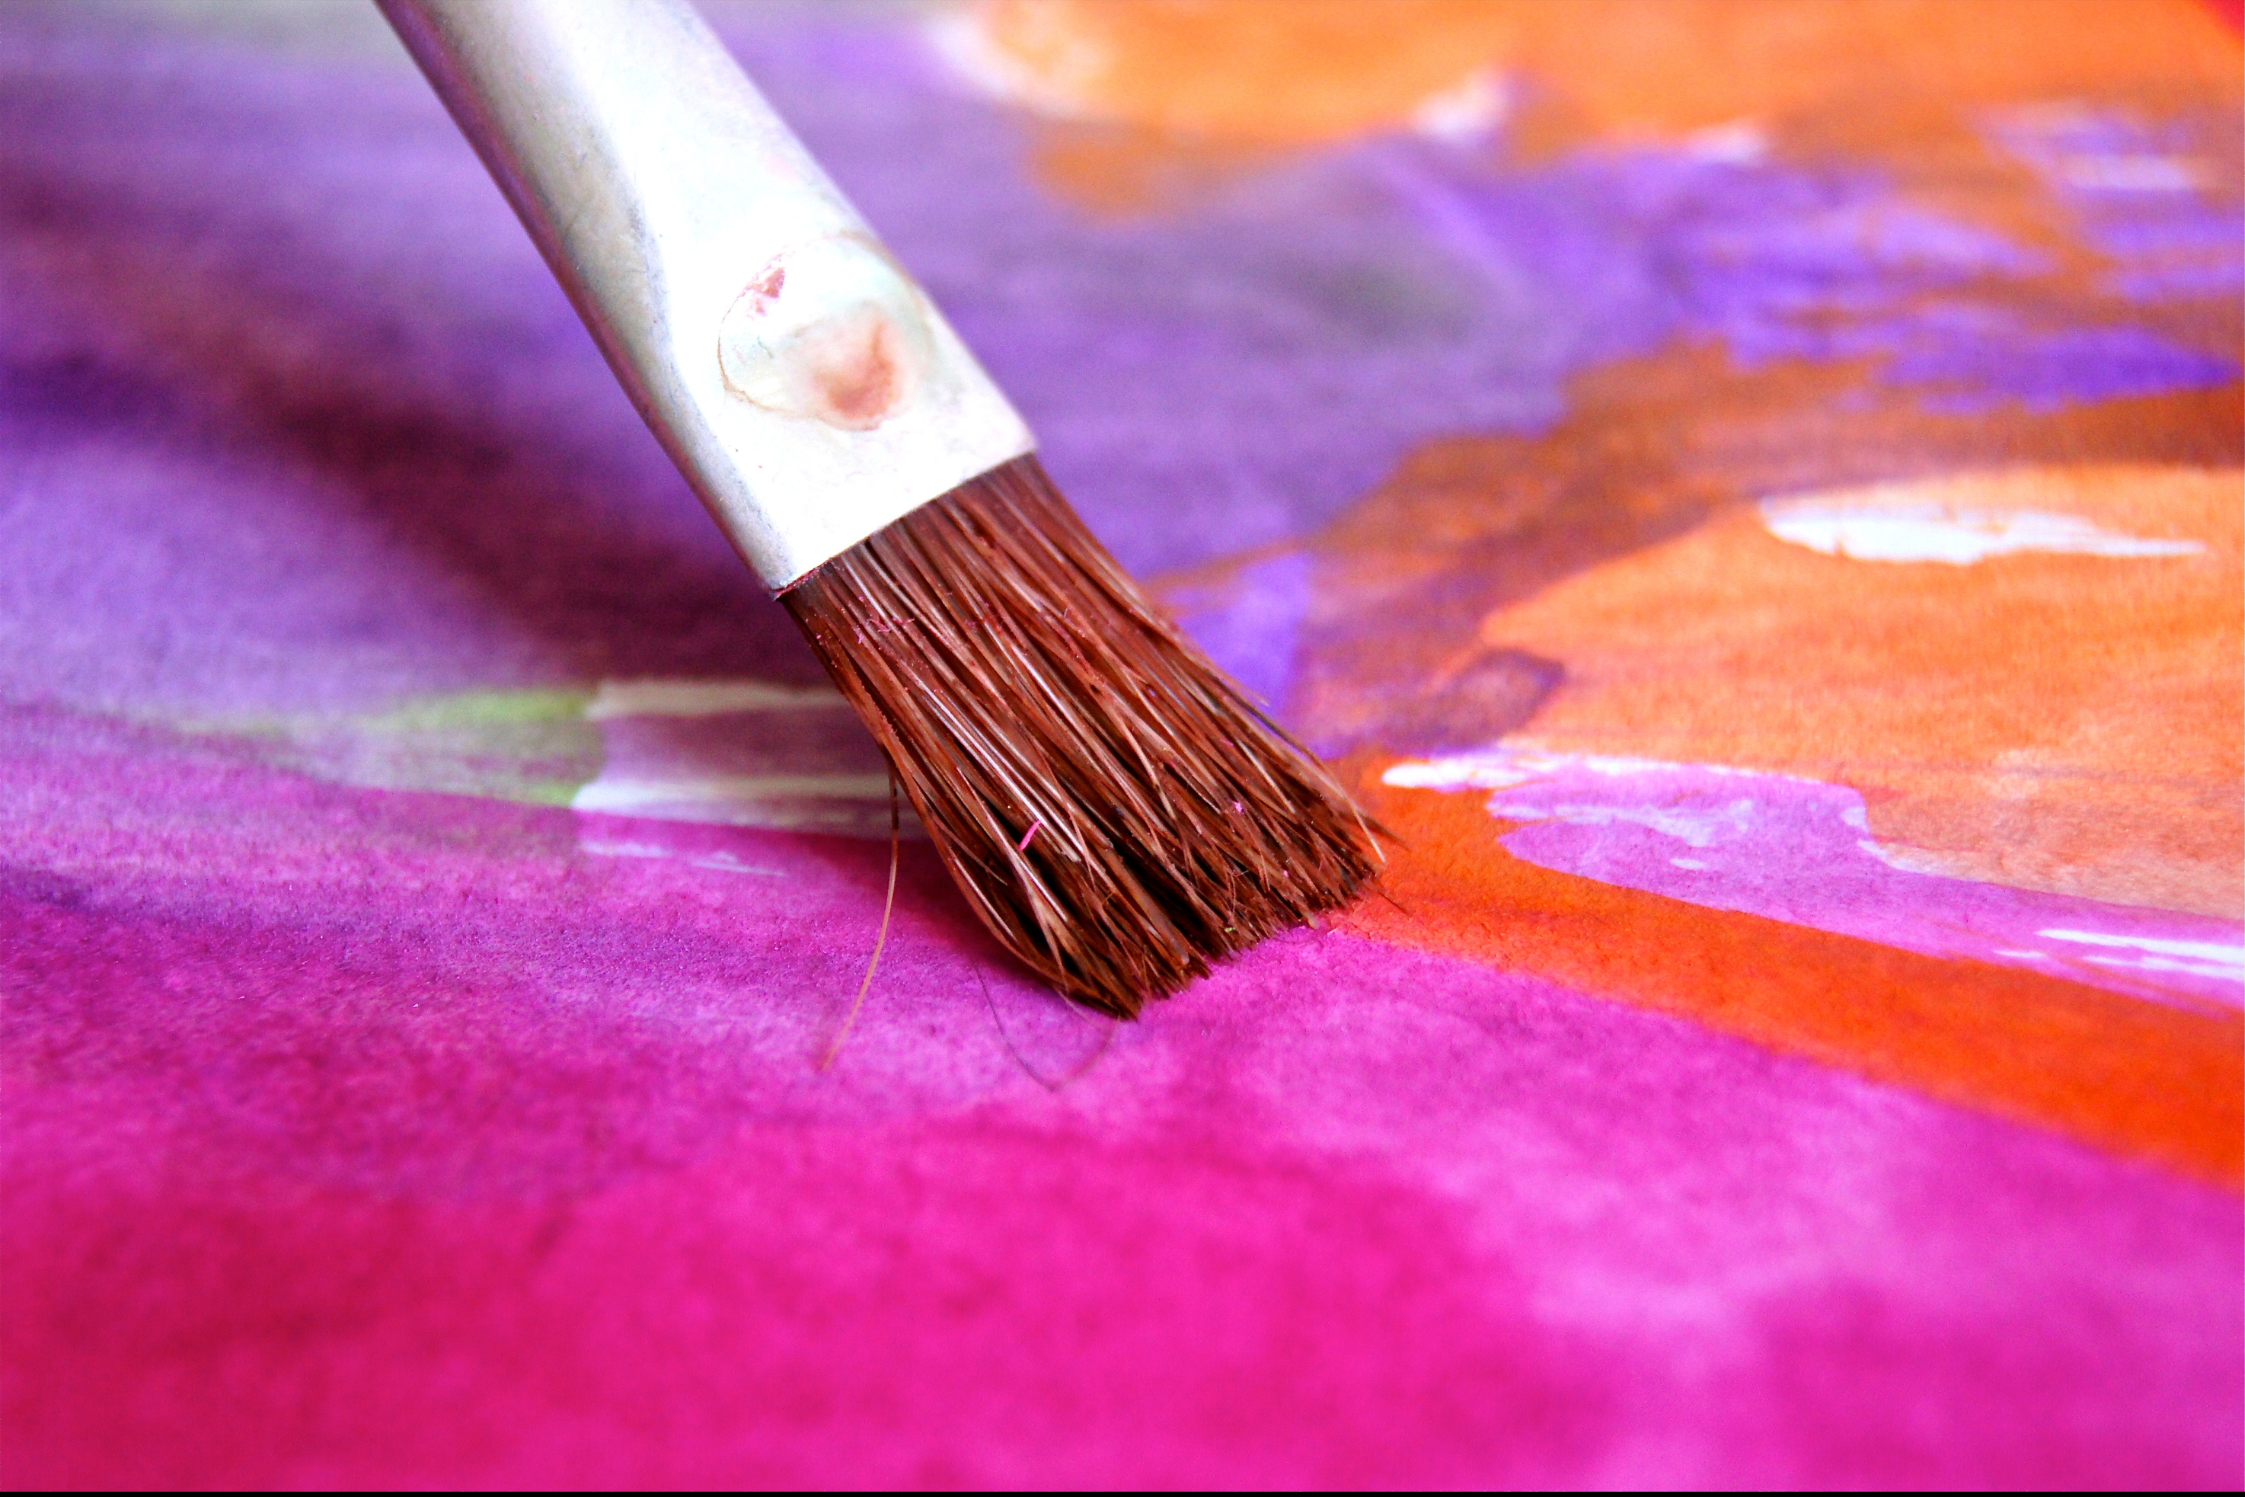 A photograph of a paintbrush sweeping across a vibrant purple, pink and orange painting. The paintbrush has brown bristles with a silver cap